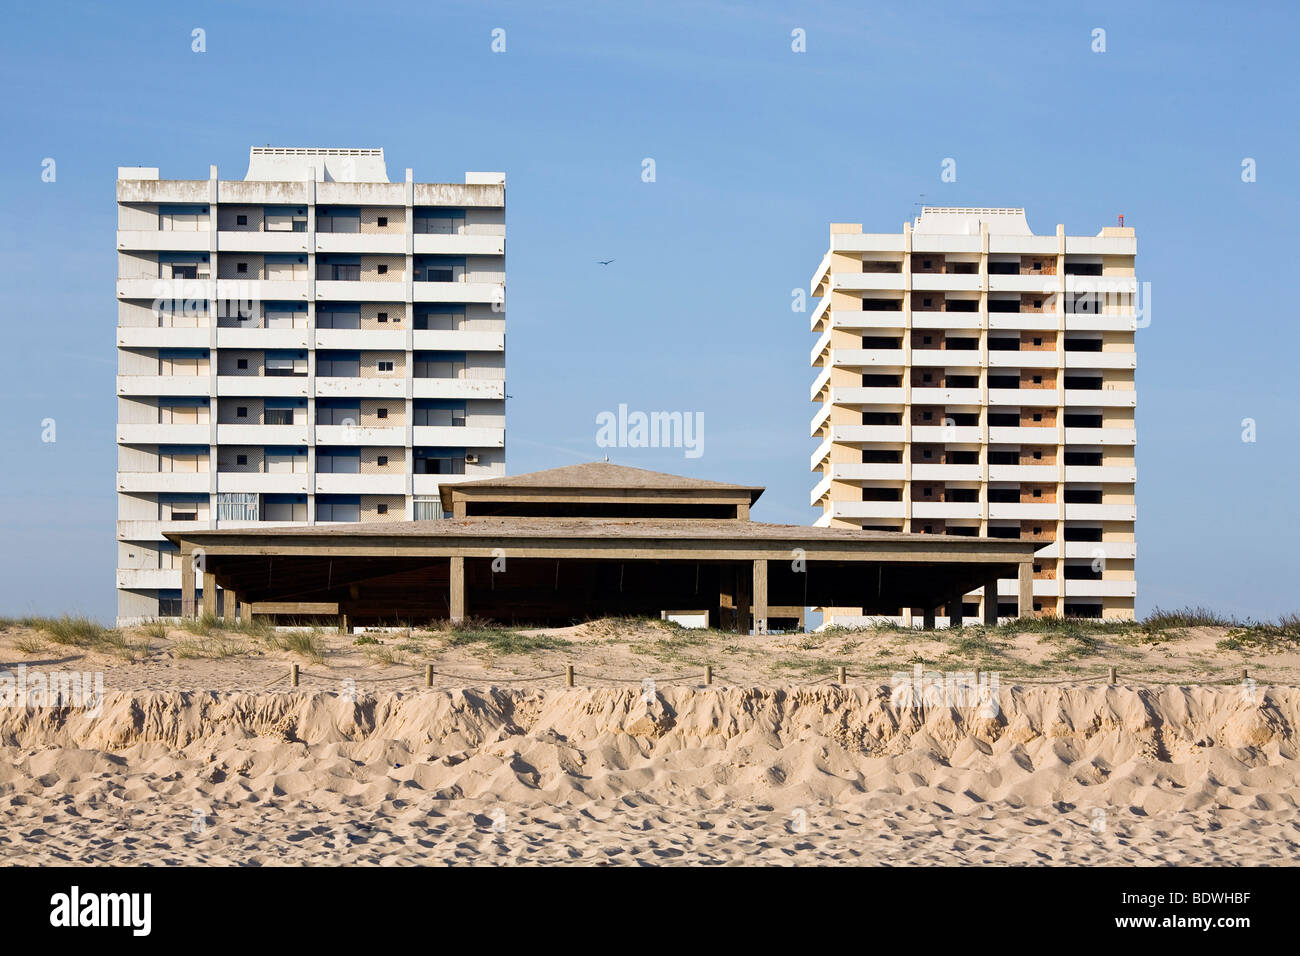 Architectural blunders, ruins, high-rise buildingd on the beach of Alvor, Algarve, Portugal, Europe Stock Photo